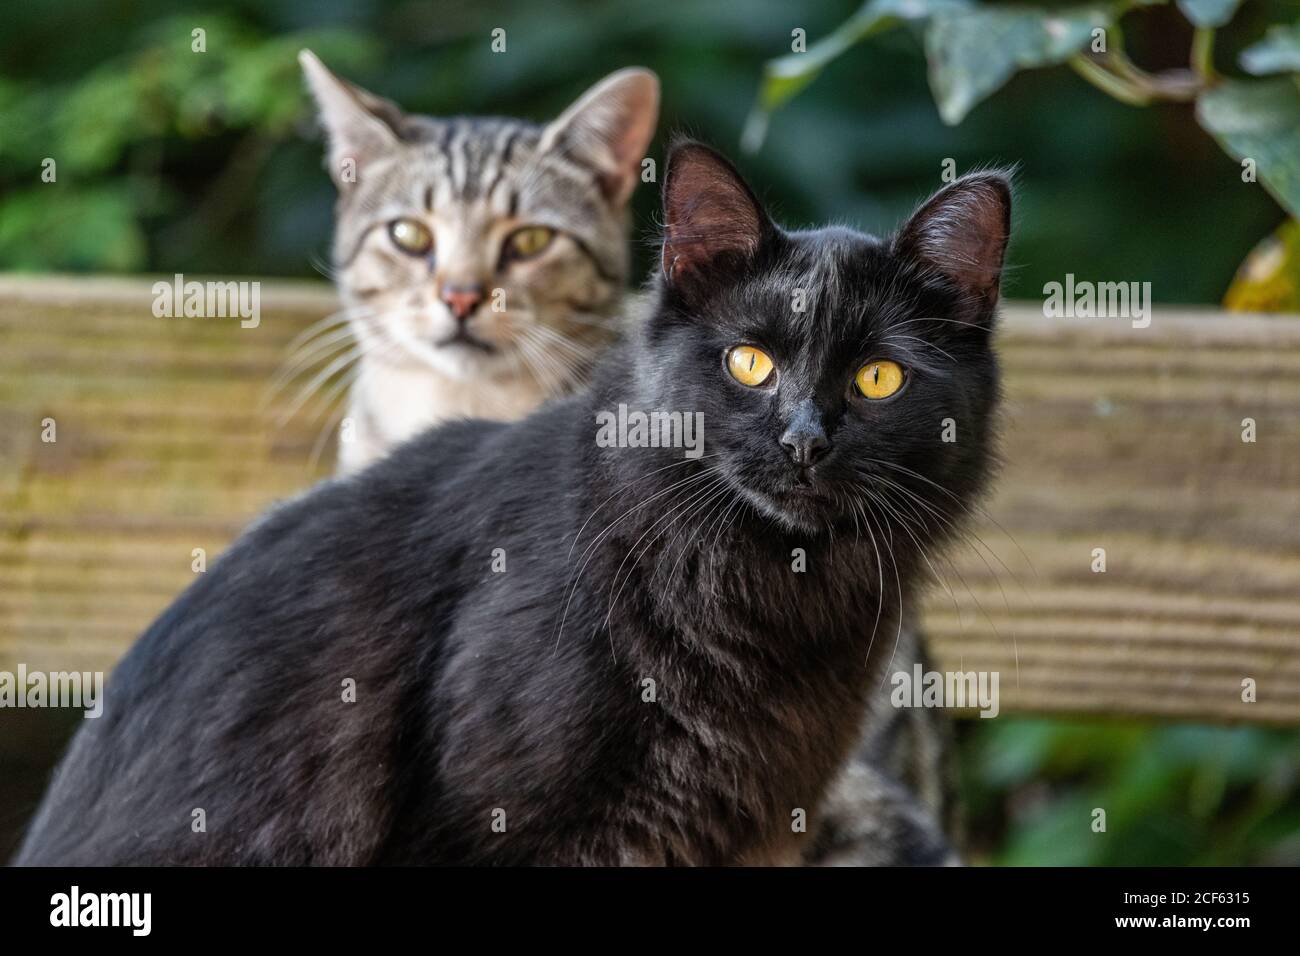 Two young cats outdoor in the garden - black cat and short hair common house cat portrait. Stock Photo